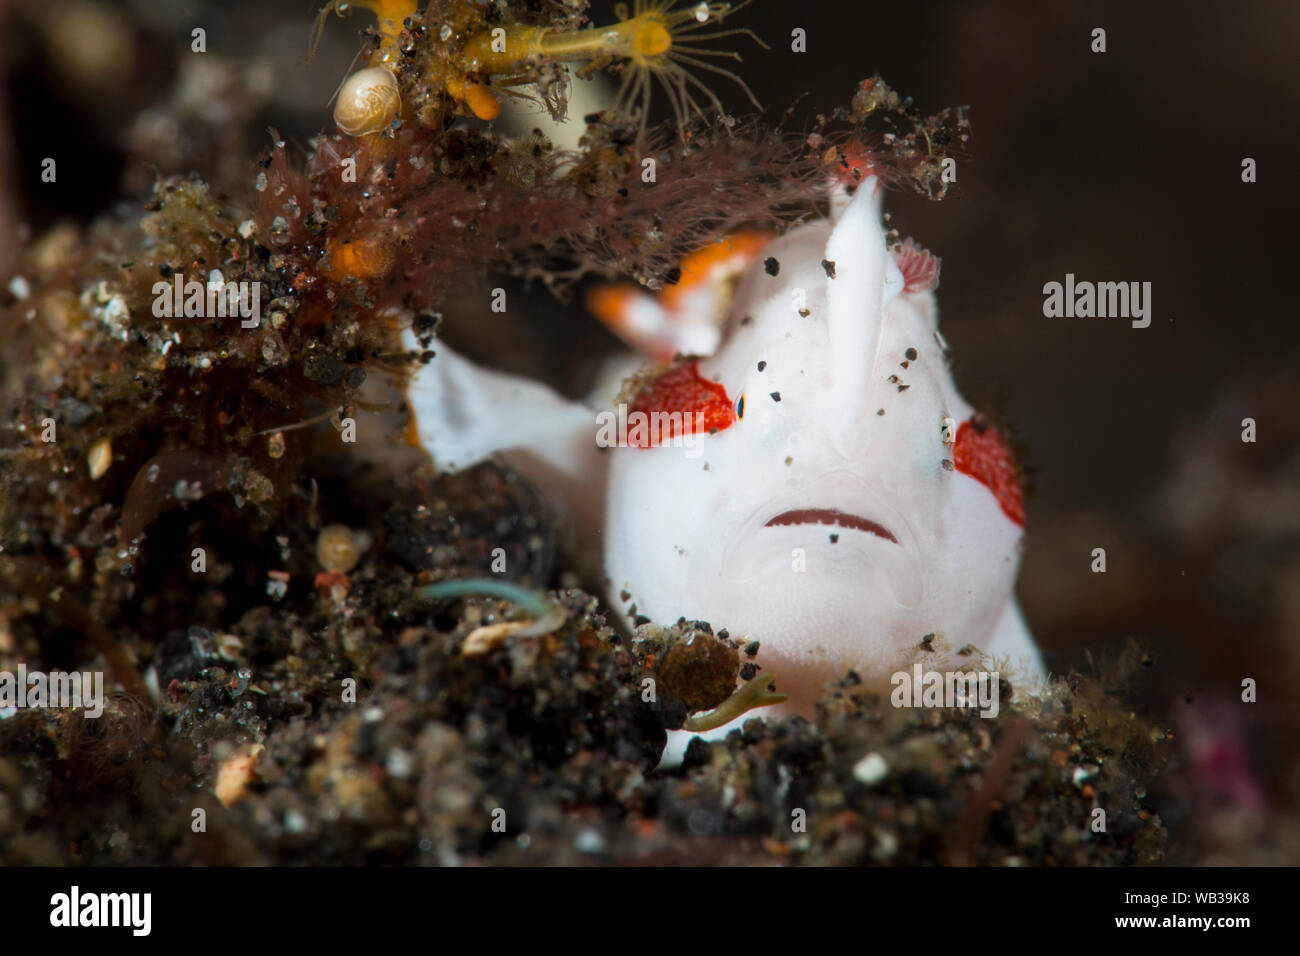 Tiny Juvenile Clown Frogfish in Black Volcanic Sand, Bali Indonesia Stock Photo